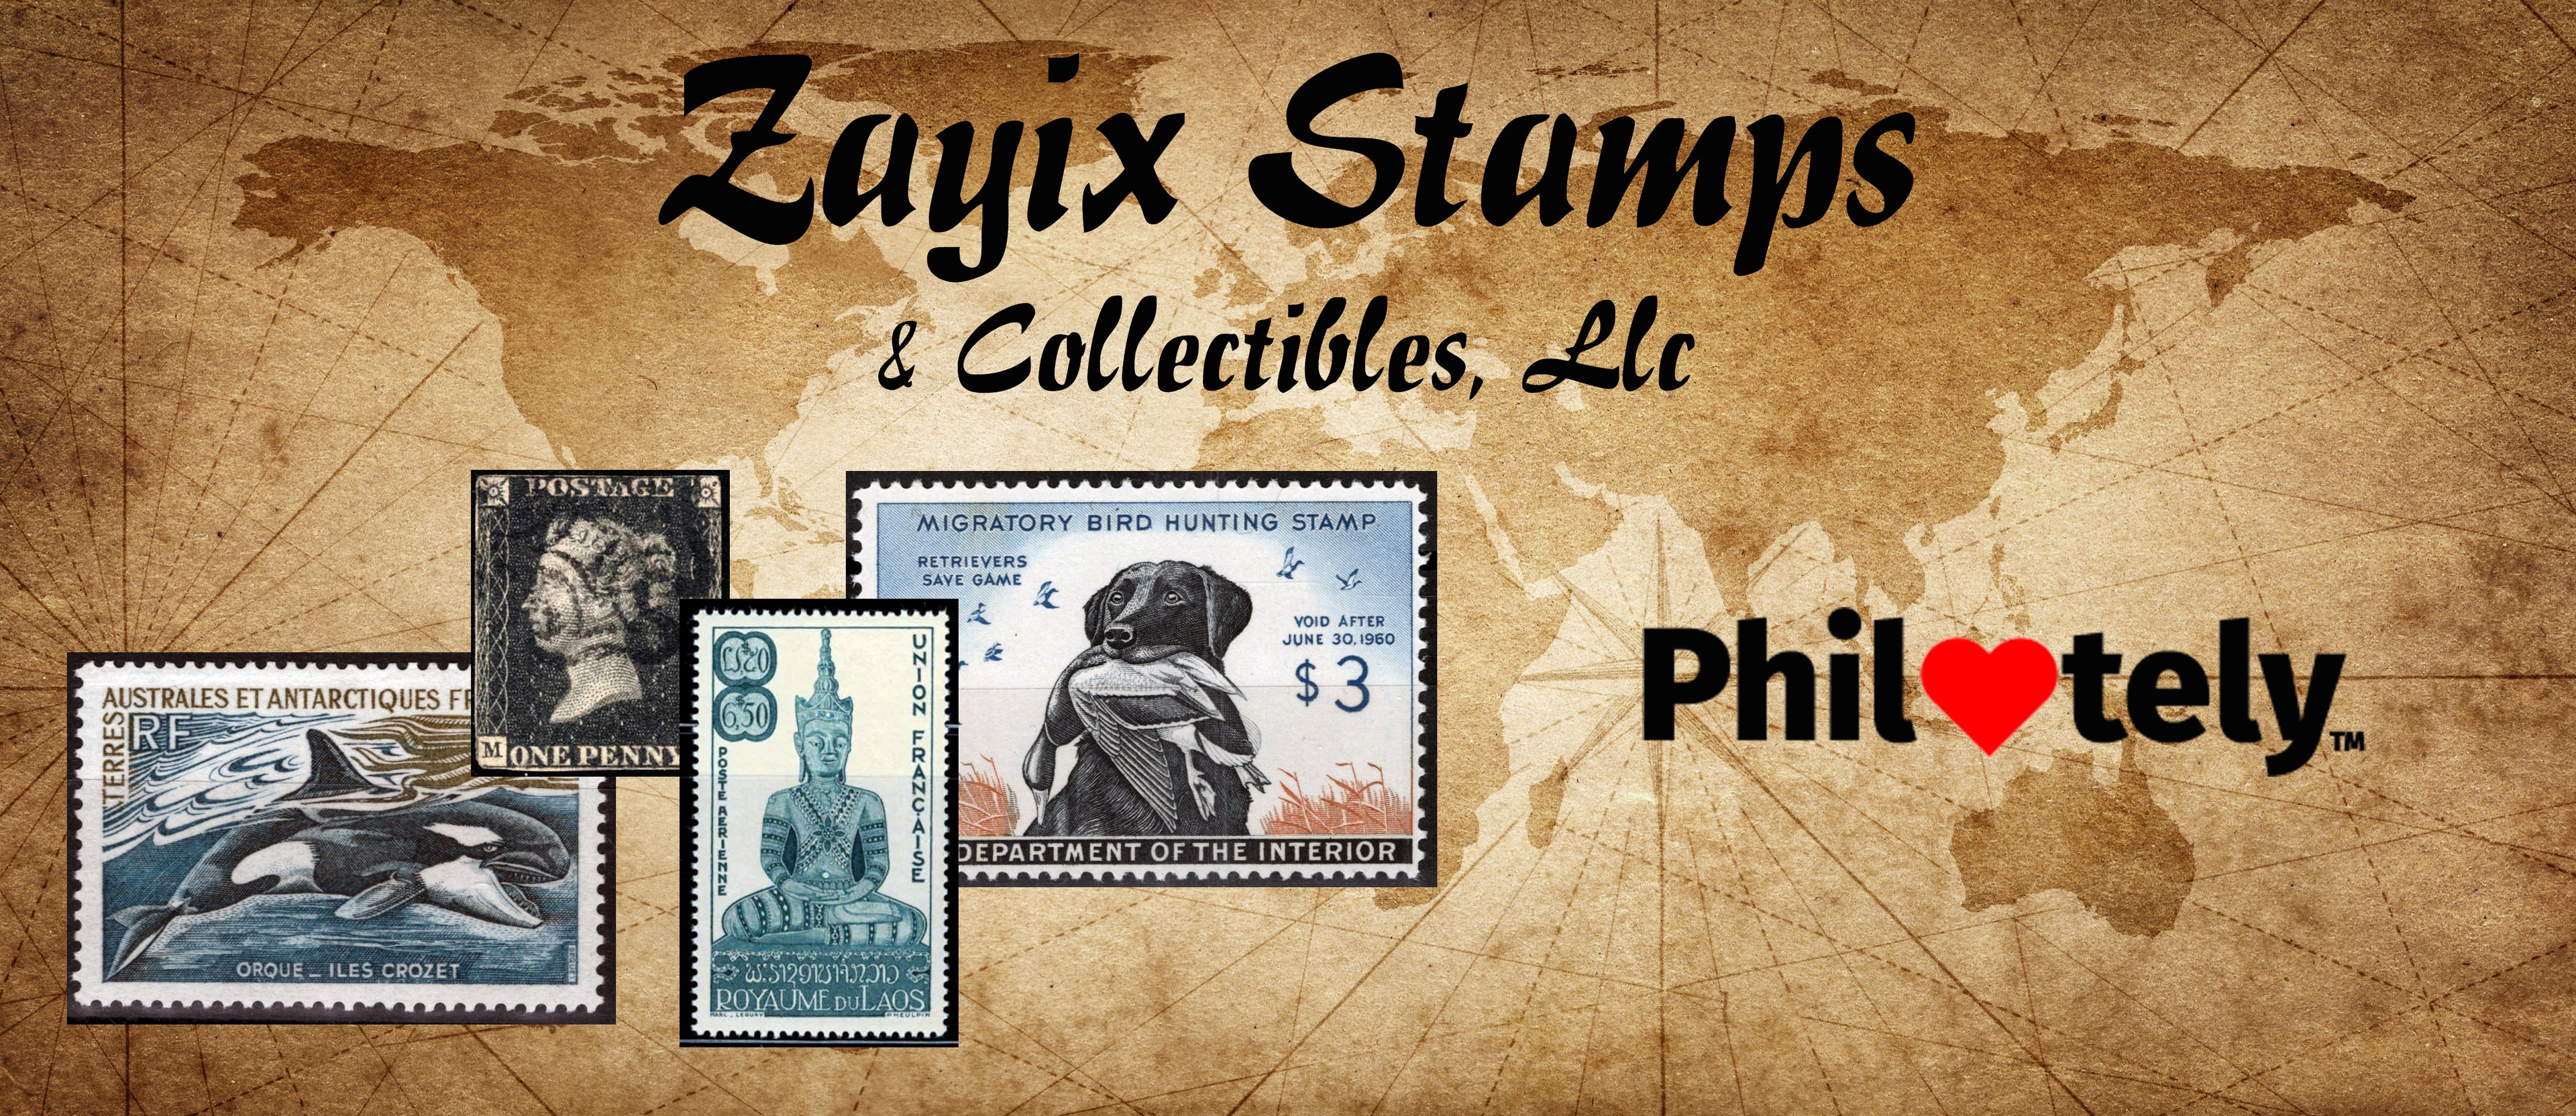 Zayix Stamps & Collectibles, LLC, We Heart Philately Shop Now at our store image of our logo, an FSAT stamp of an orca whale, a penny black from Great Britain, a Buddha statue stamp from Laos, and a US duck stamp of a Labrador Retriever carrying a duck overlaid on a parchment map of the world. r